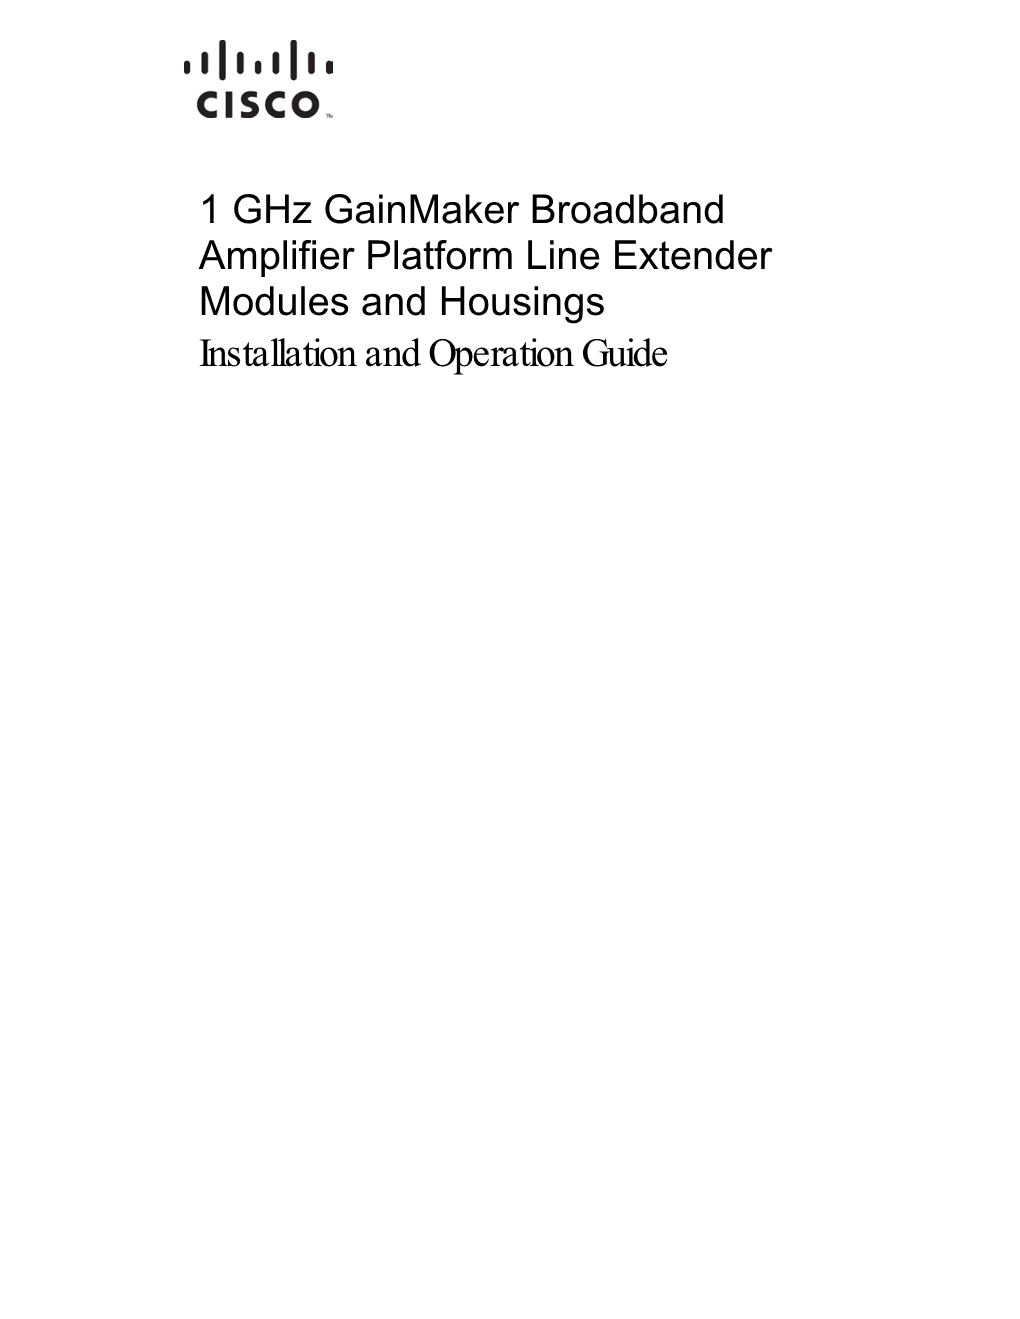 1 Ghz Gainmaker Broadband Amplifier Platform Line Extender Modules and Housings Installation and Operation Guide